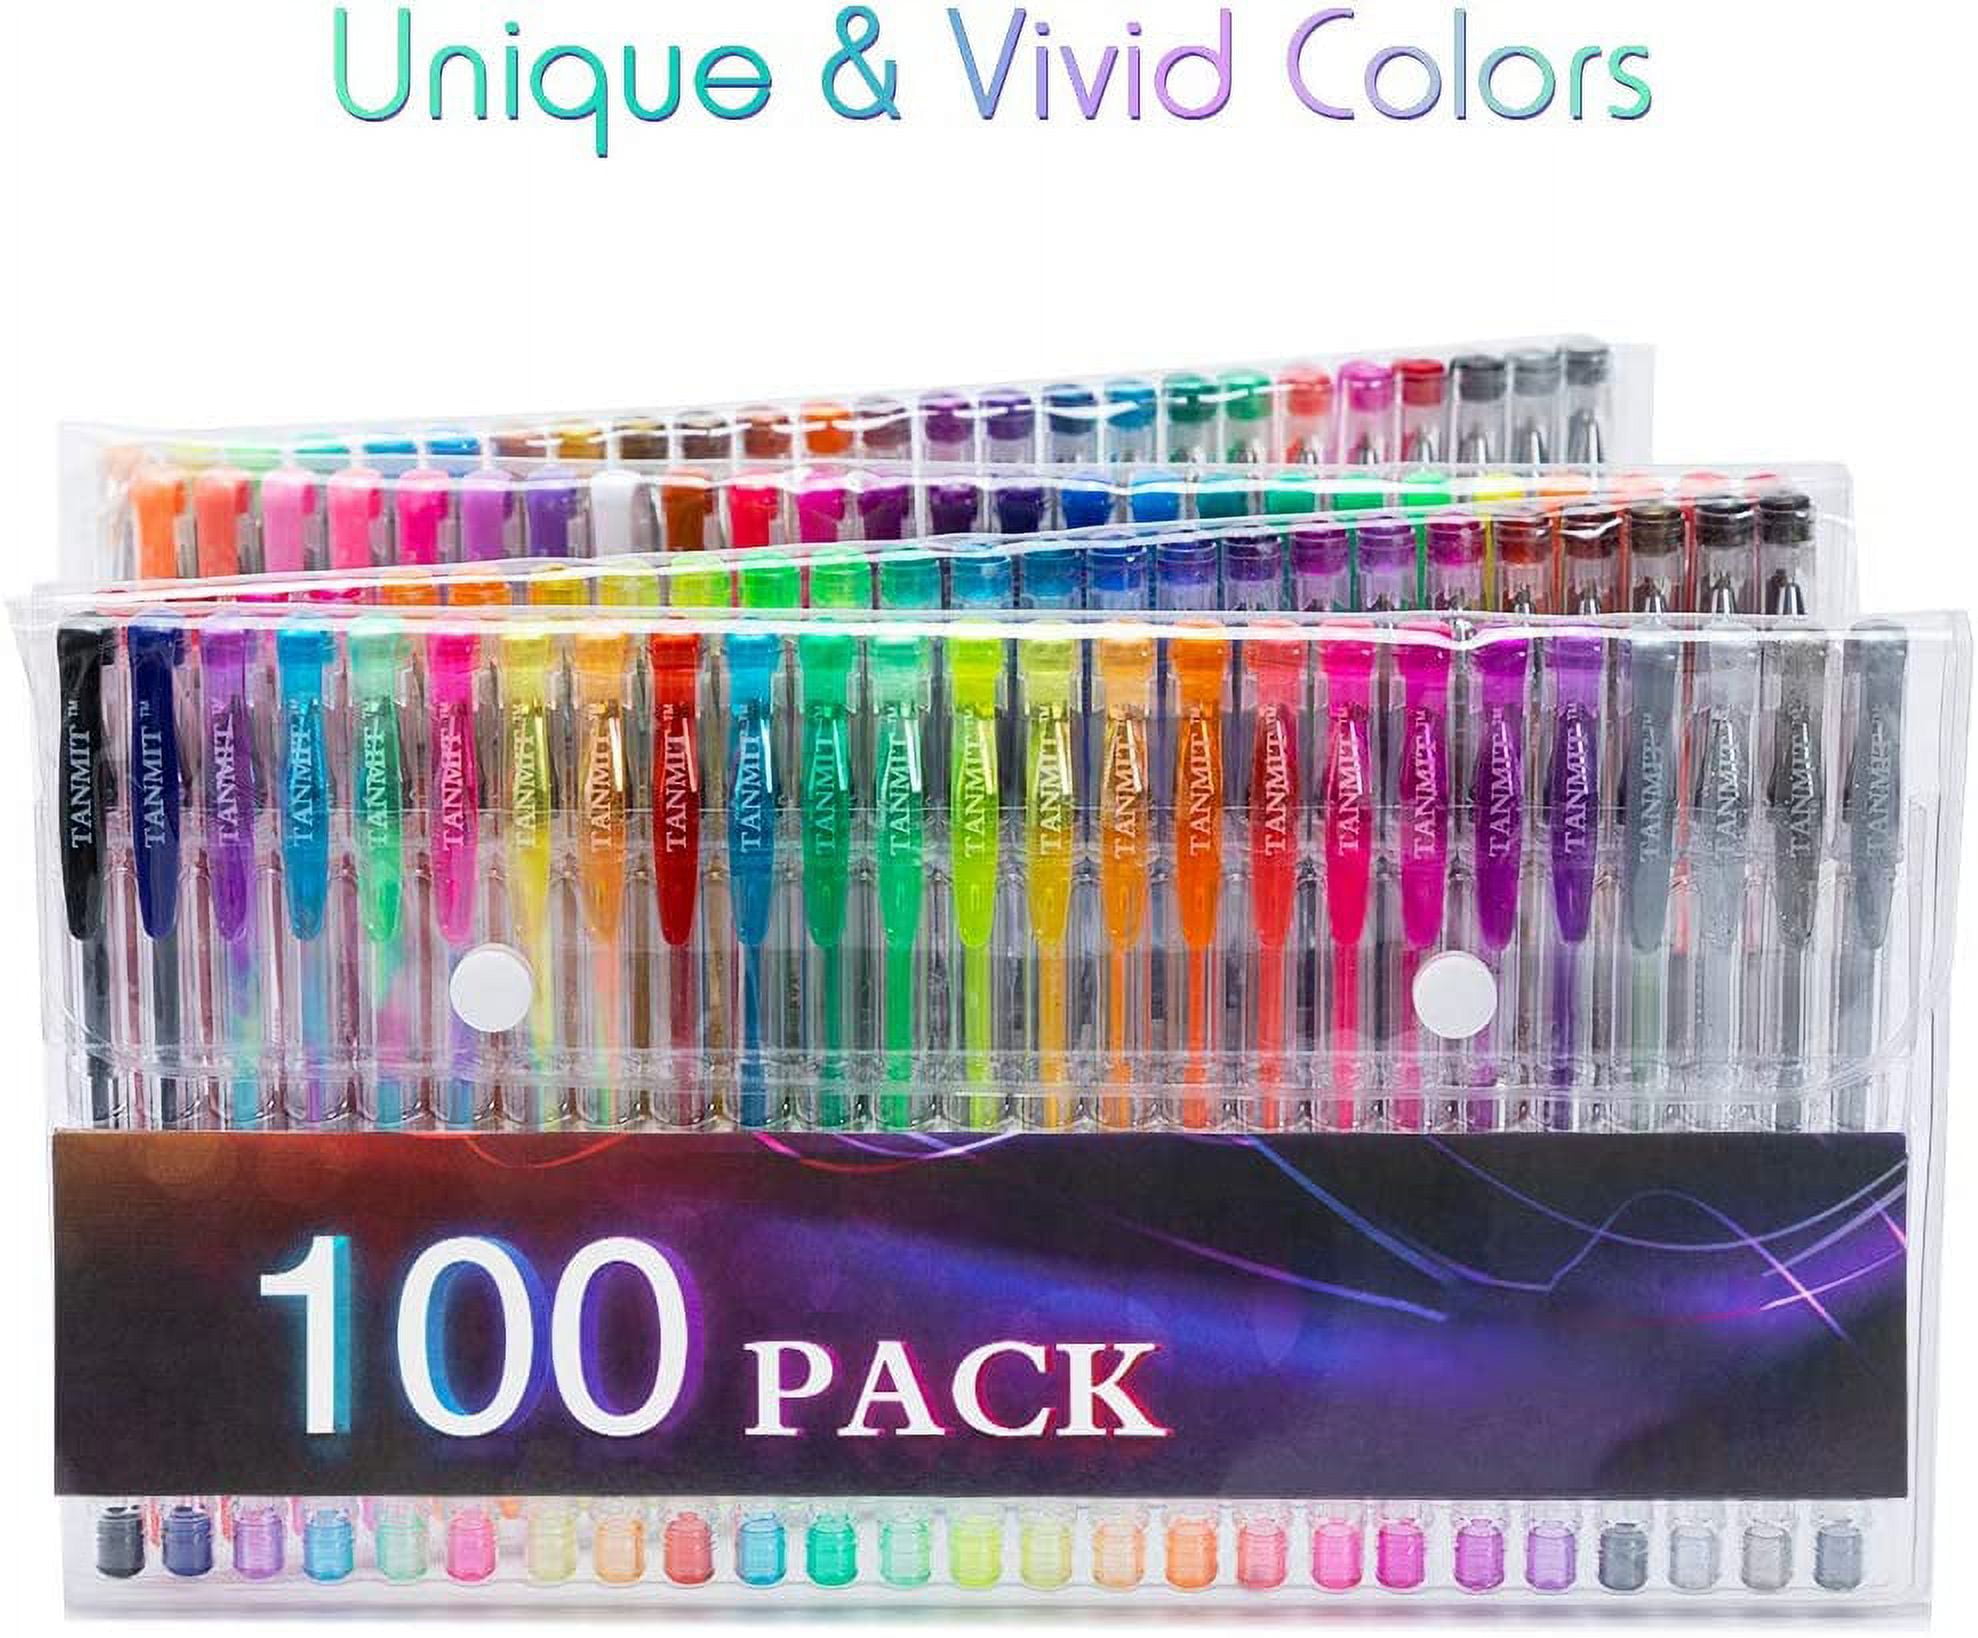 TANMIT 100 Coloring Gel Pens Set for Adults Coloring Books